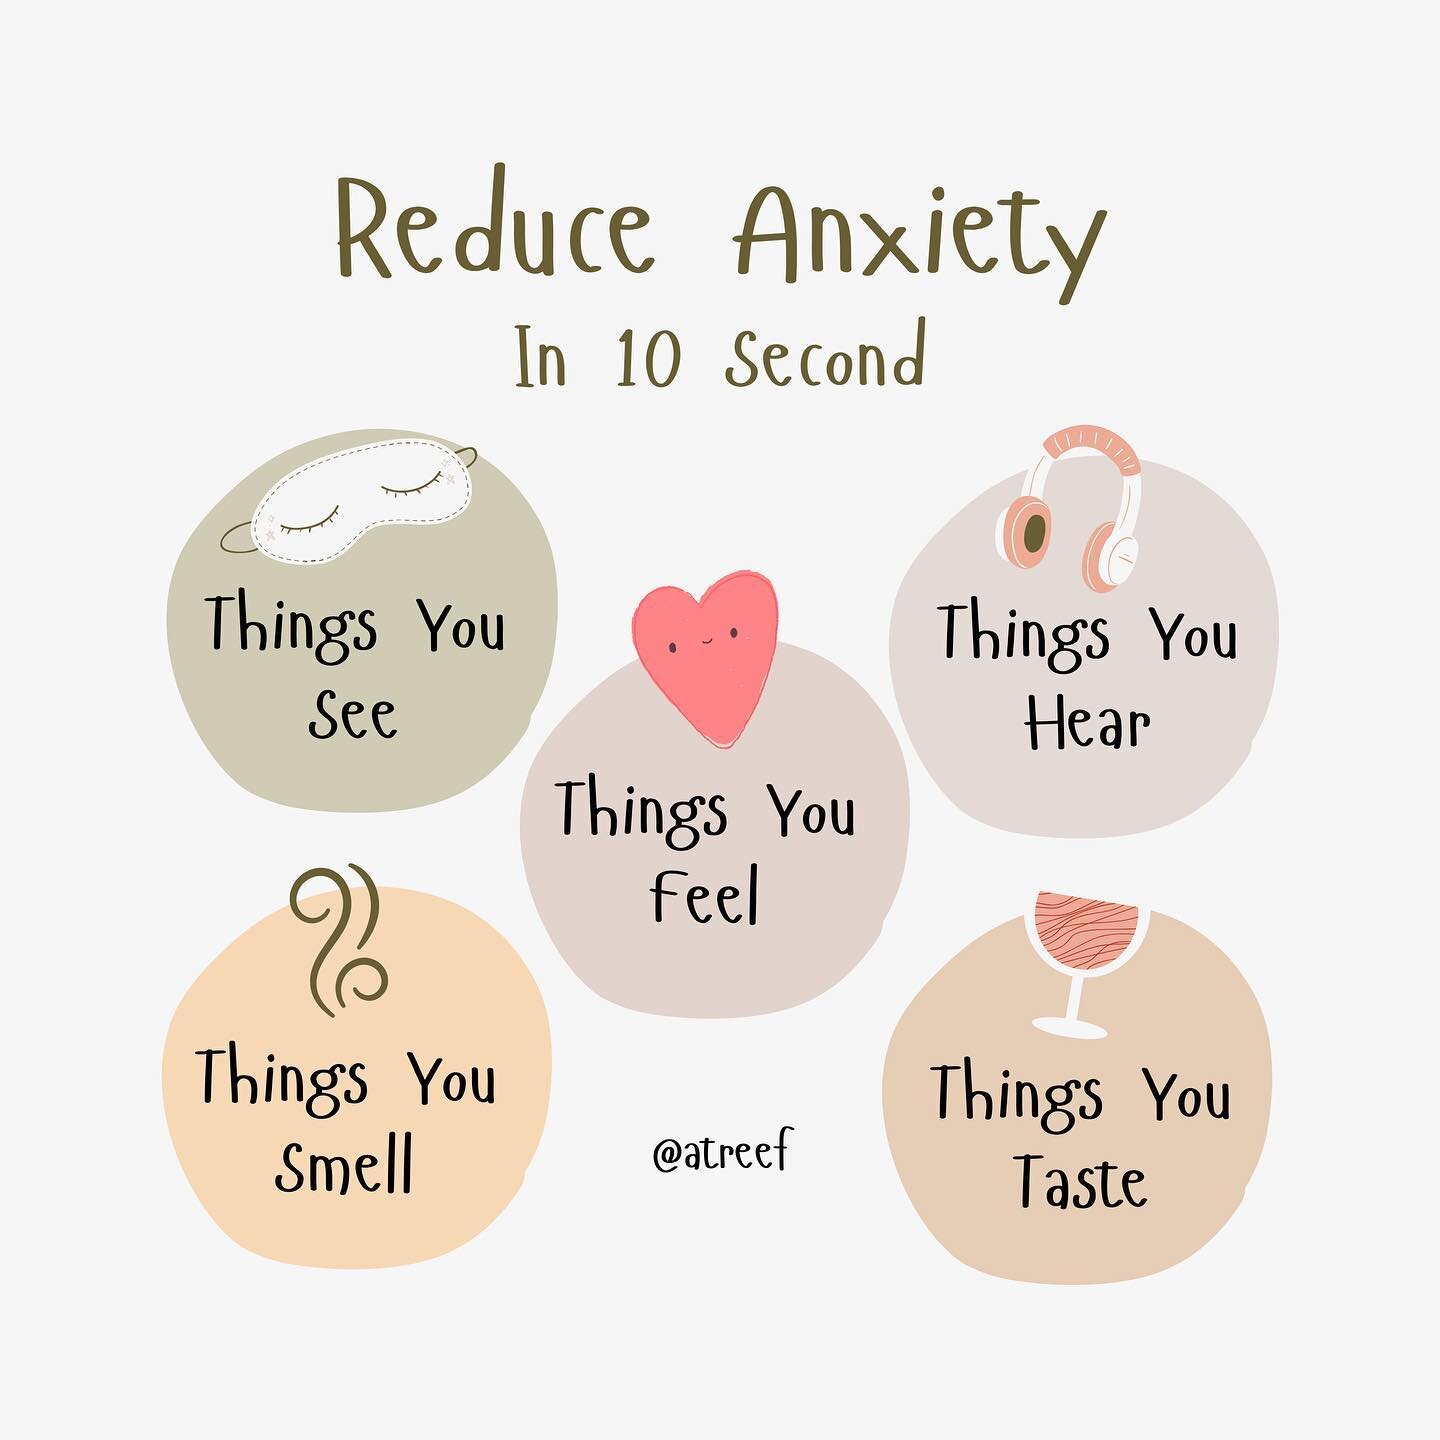 Unlock calm in just 10 seconds by engaging all your senses. Observe what you see, listen to what you hear, feel what's around you, take in the scents, and recognize tastes. Mindfulness starts now. 🌱 @atreef

#Mindfulness #AnxietyRelief #SensoryAware